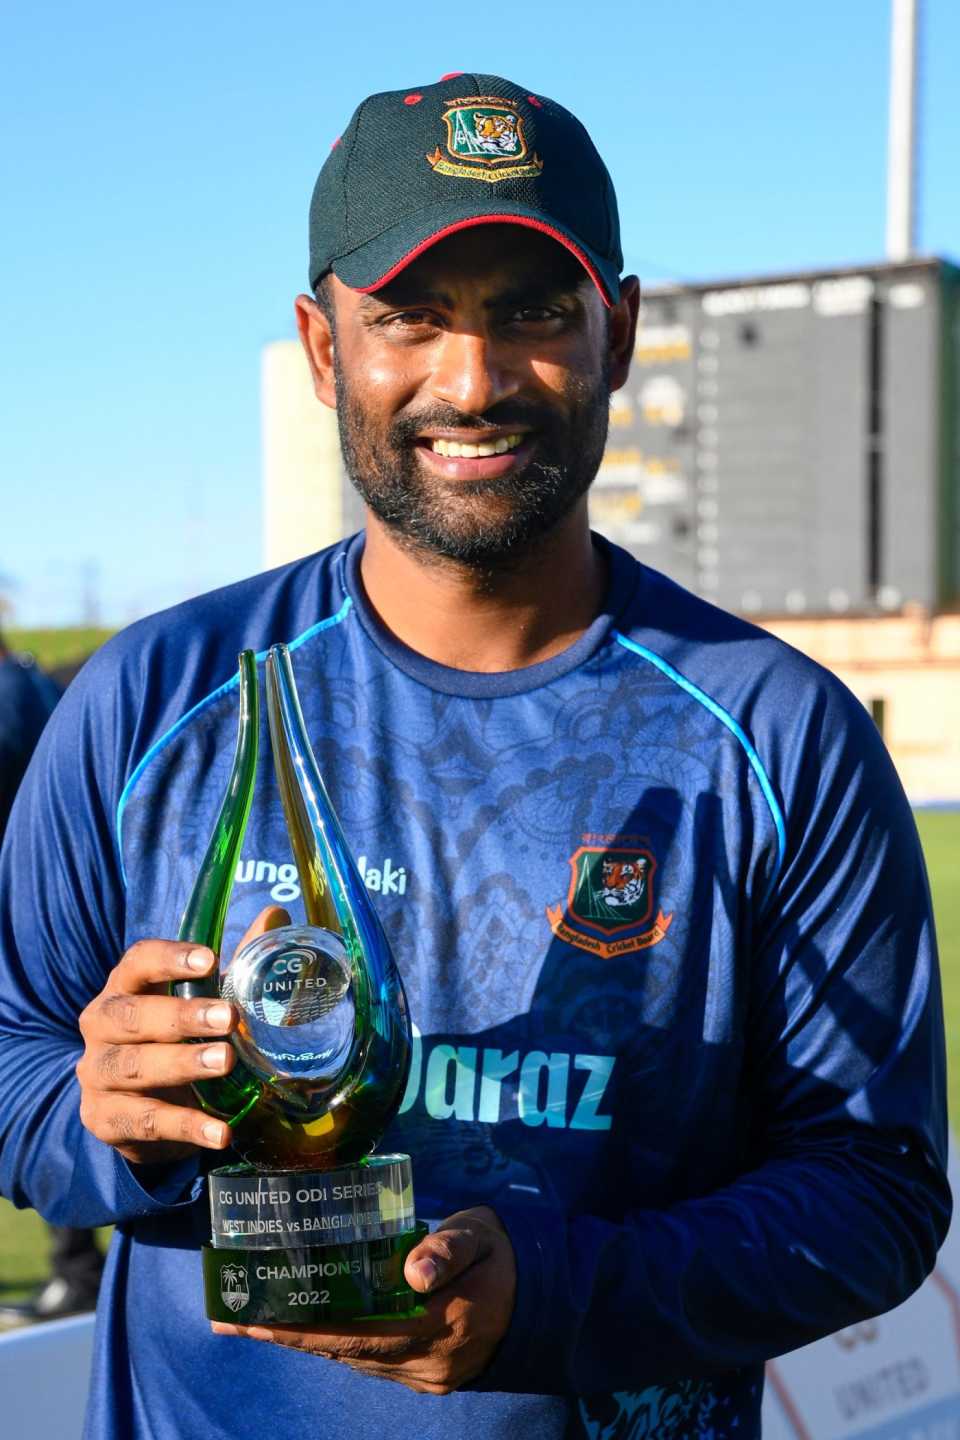 Tamim Iqbal was named player of the series